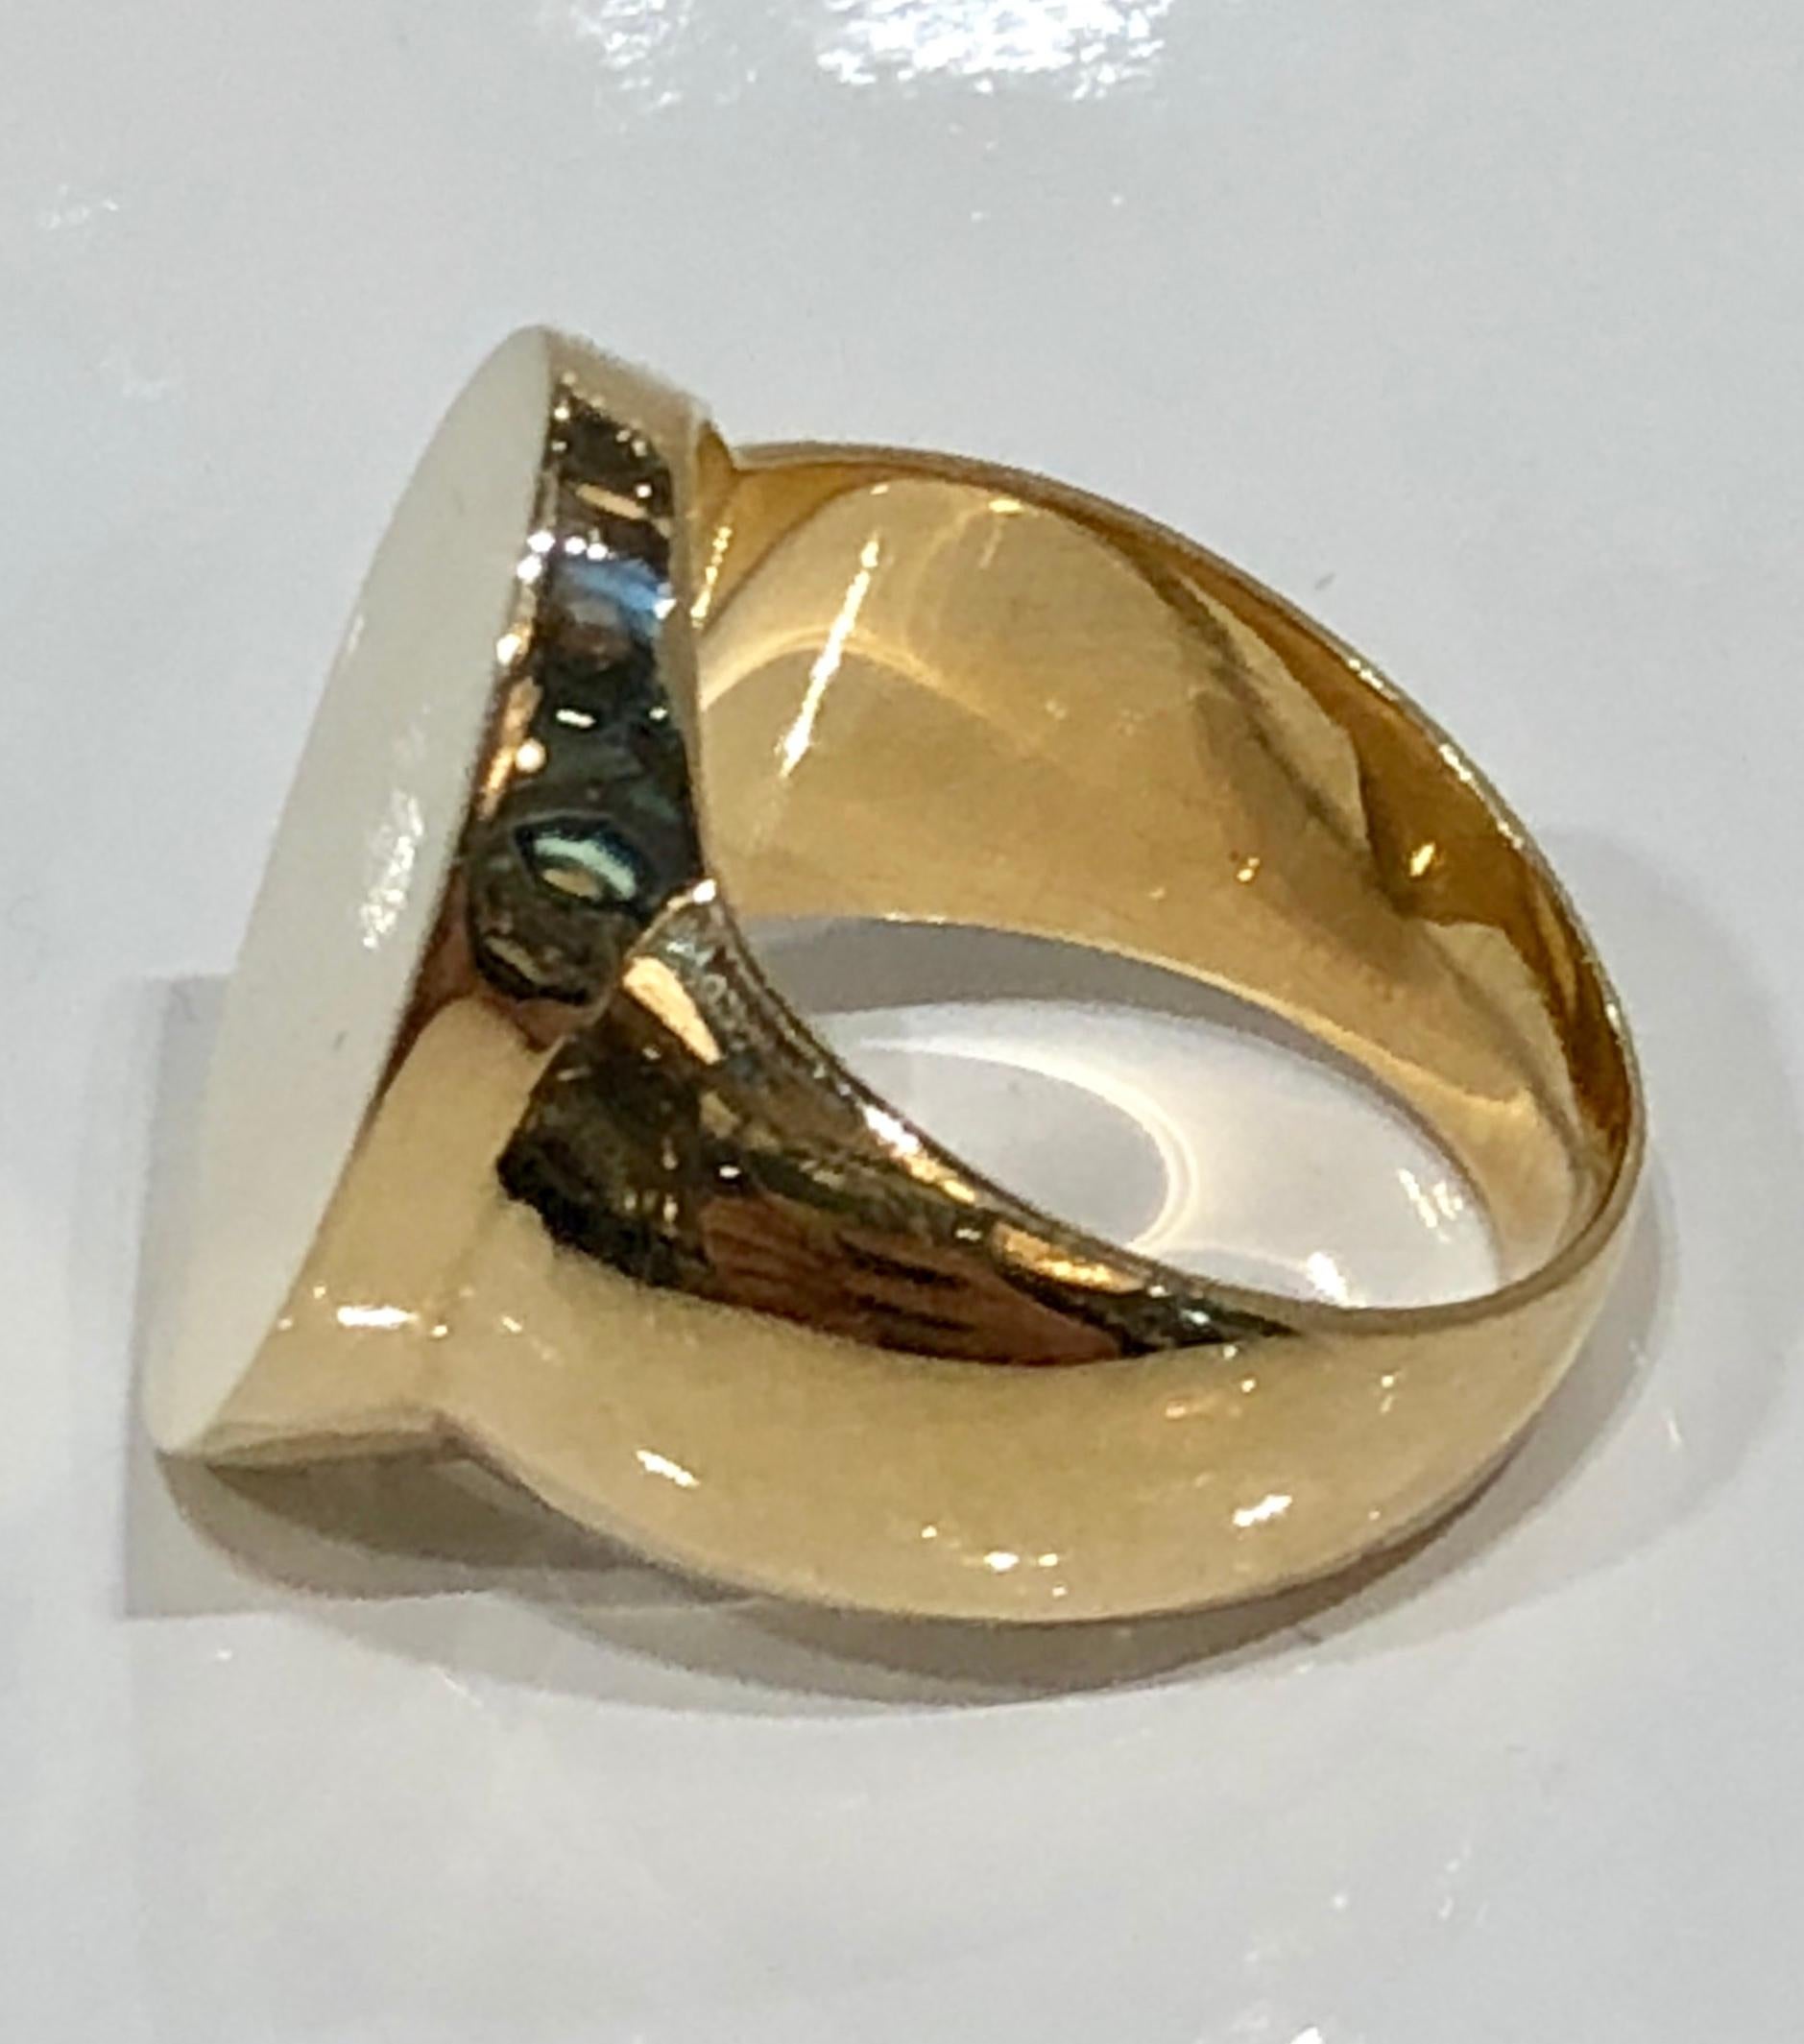 Unisex shield shaped 18k rose gold Signet ring, perfect for engraving
Designed by Martyn Lawrence Bullard
Cand be made in 18 K white, rose or yellow gold, any size, lead time 4 weeks